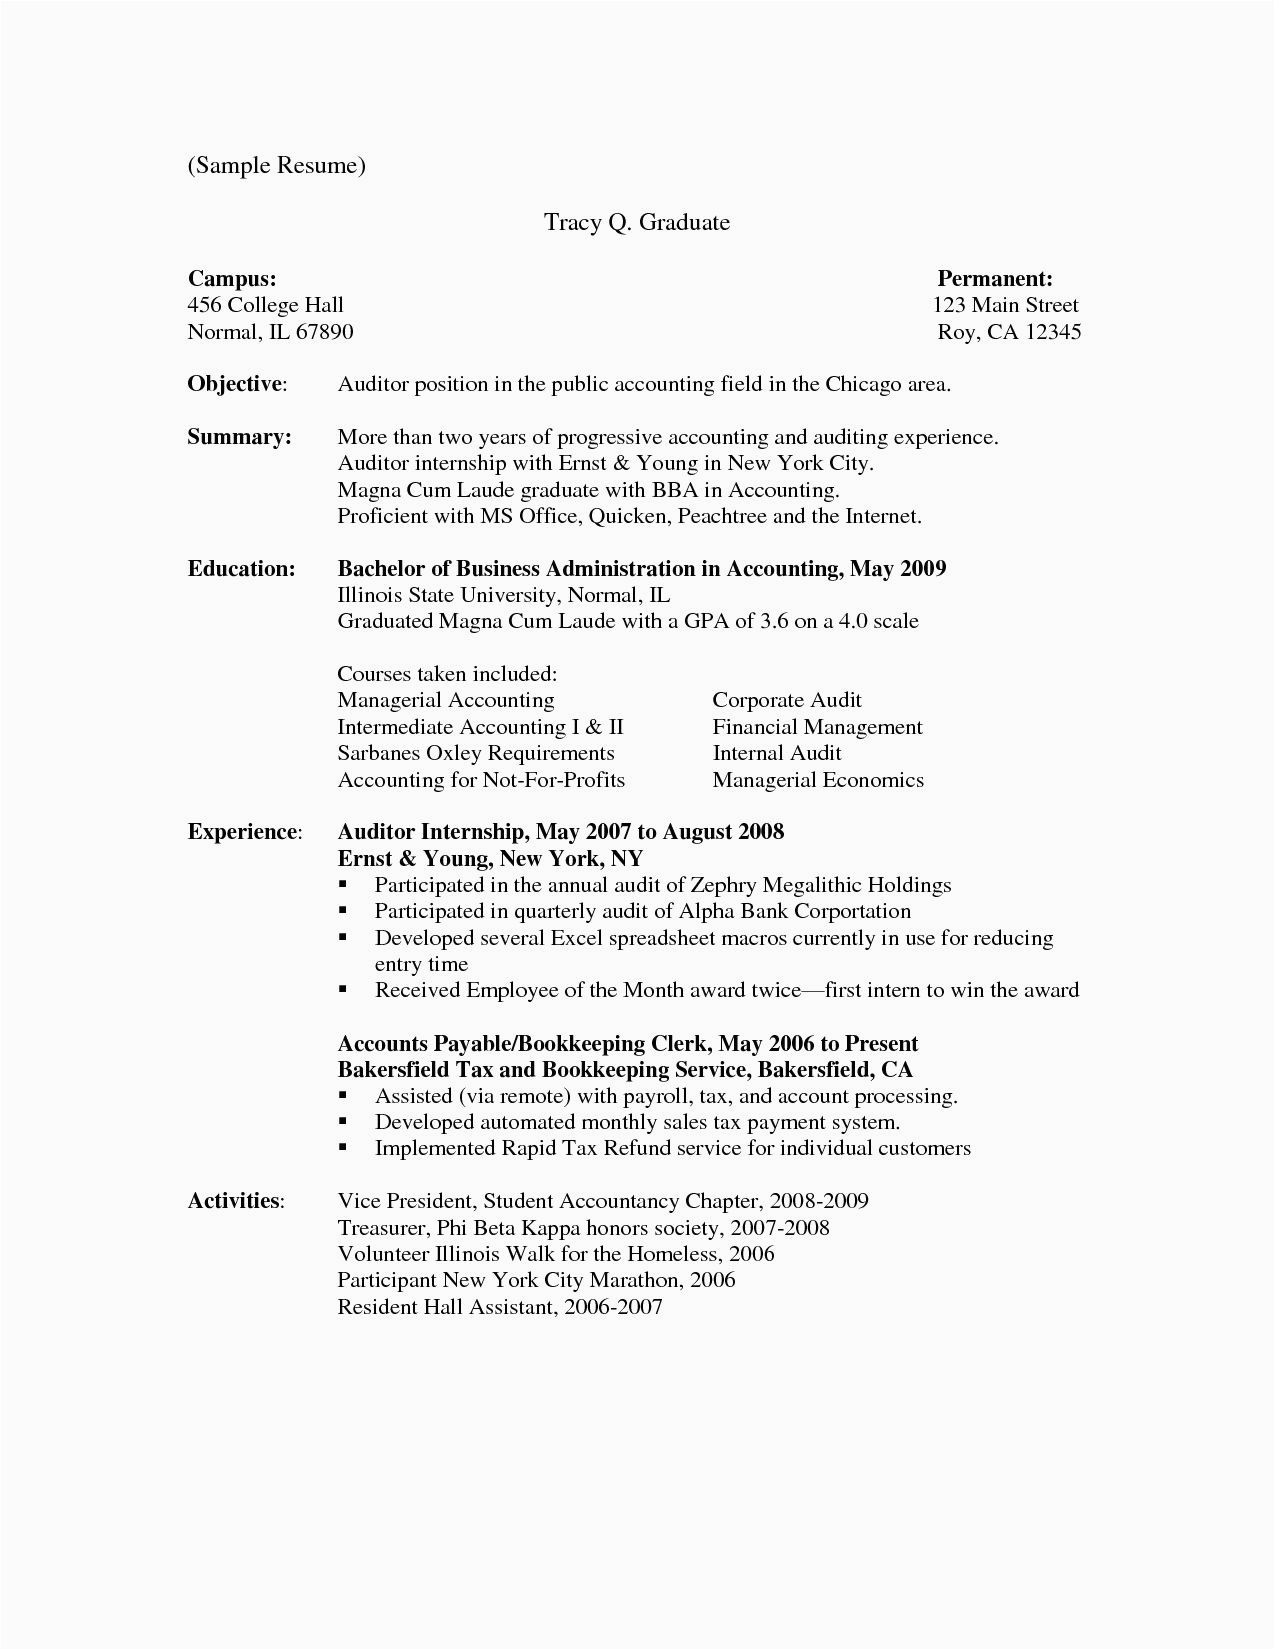 Sample College Application Resume with athletic Honors Honors and Activities to Put Resume Resume Genius